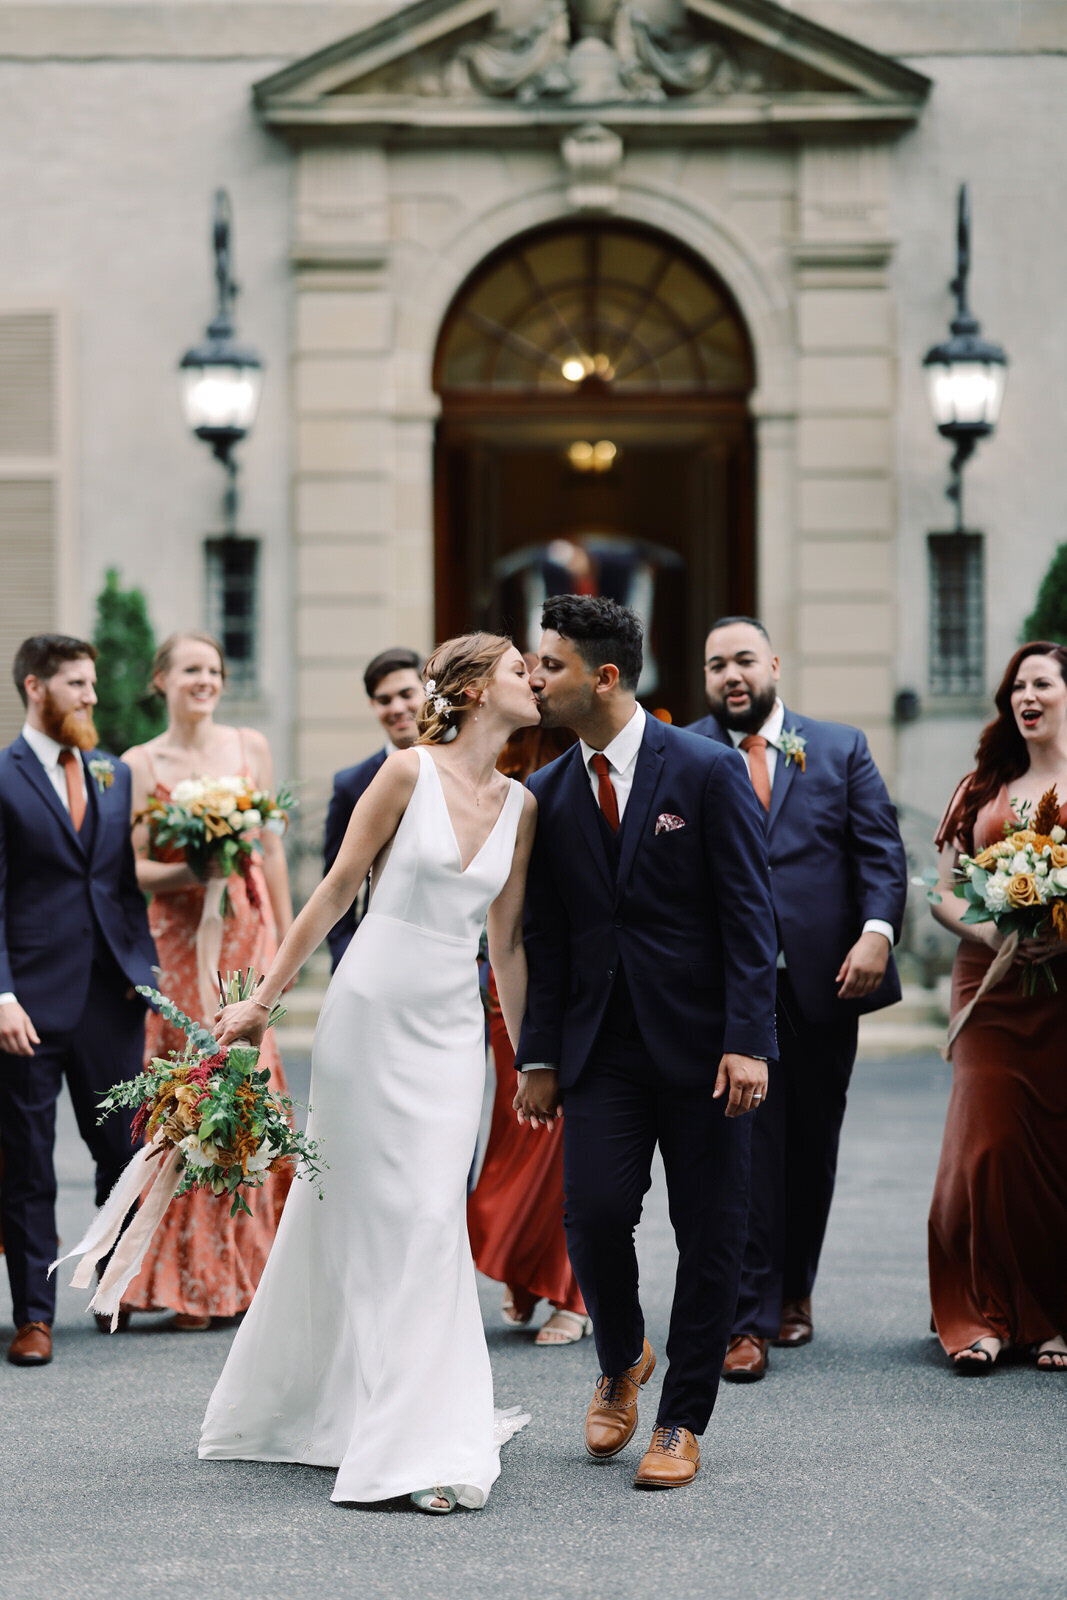 Stylish wedding photography at the Glen Manor House in Rhode Island